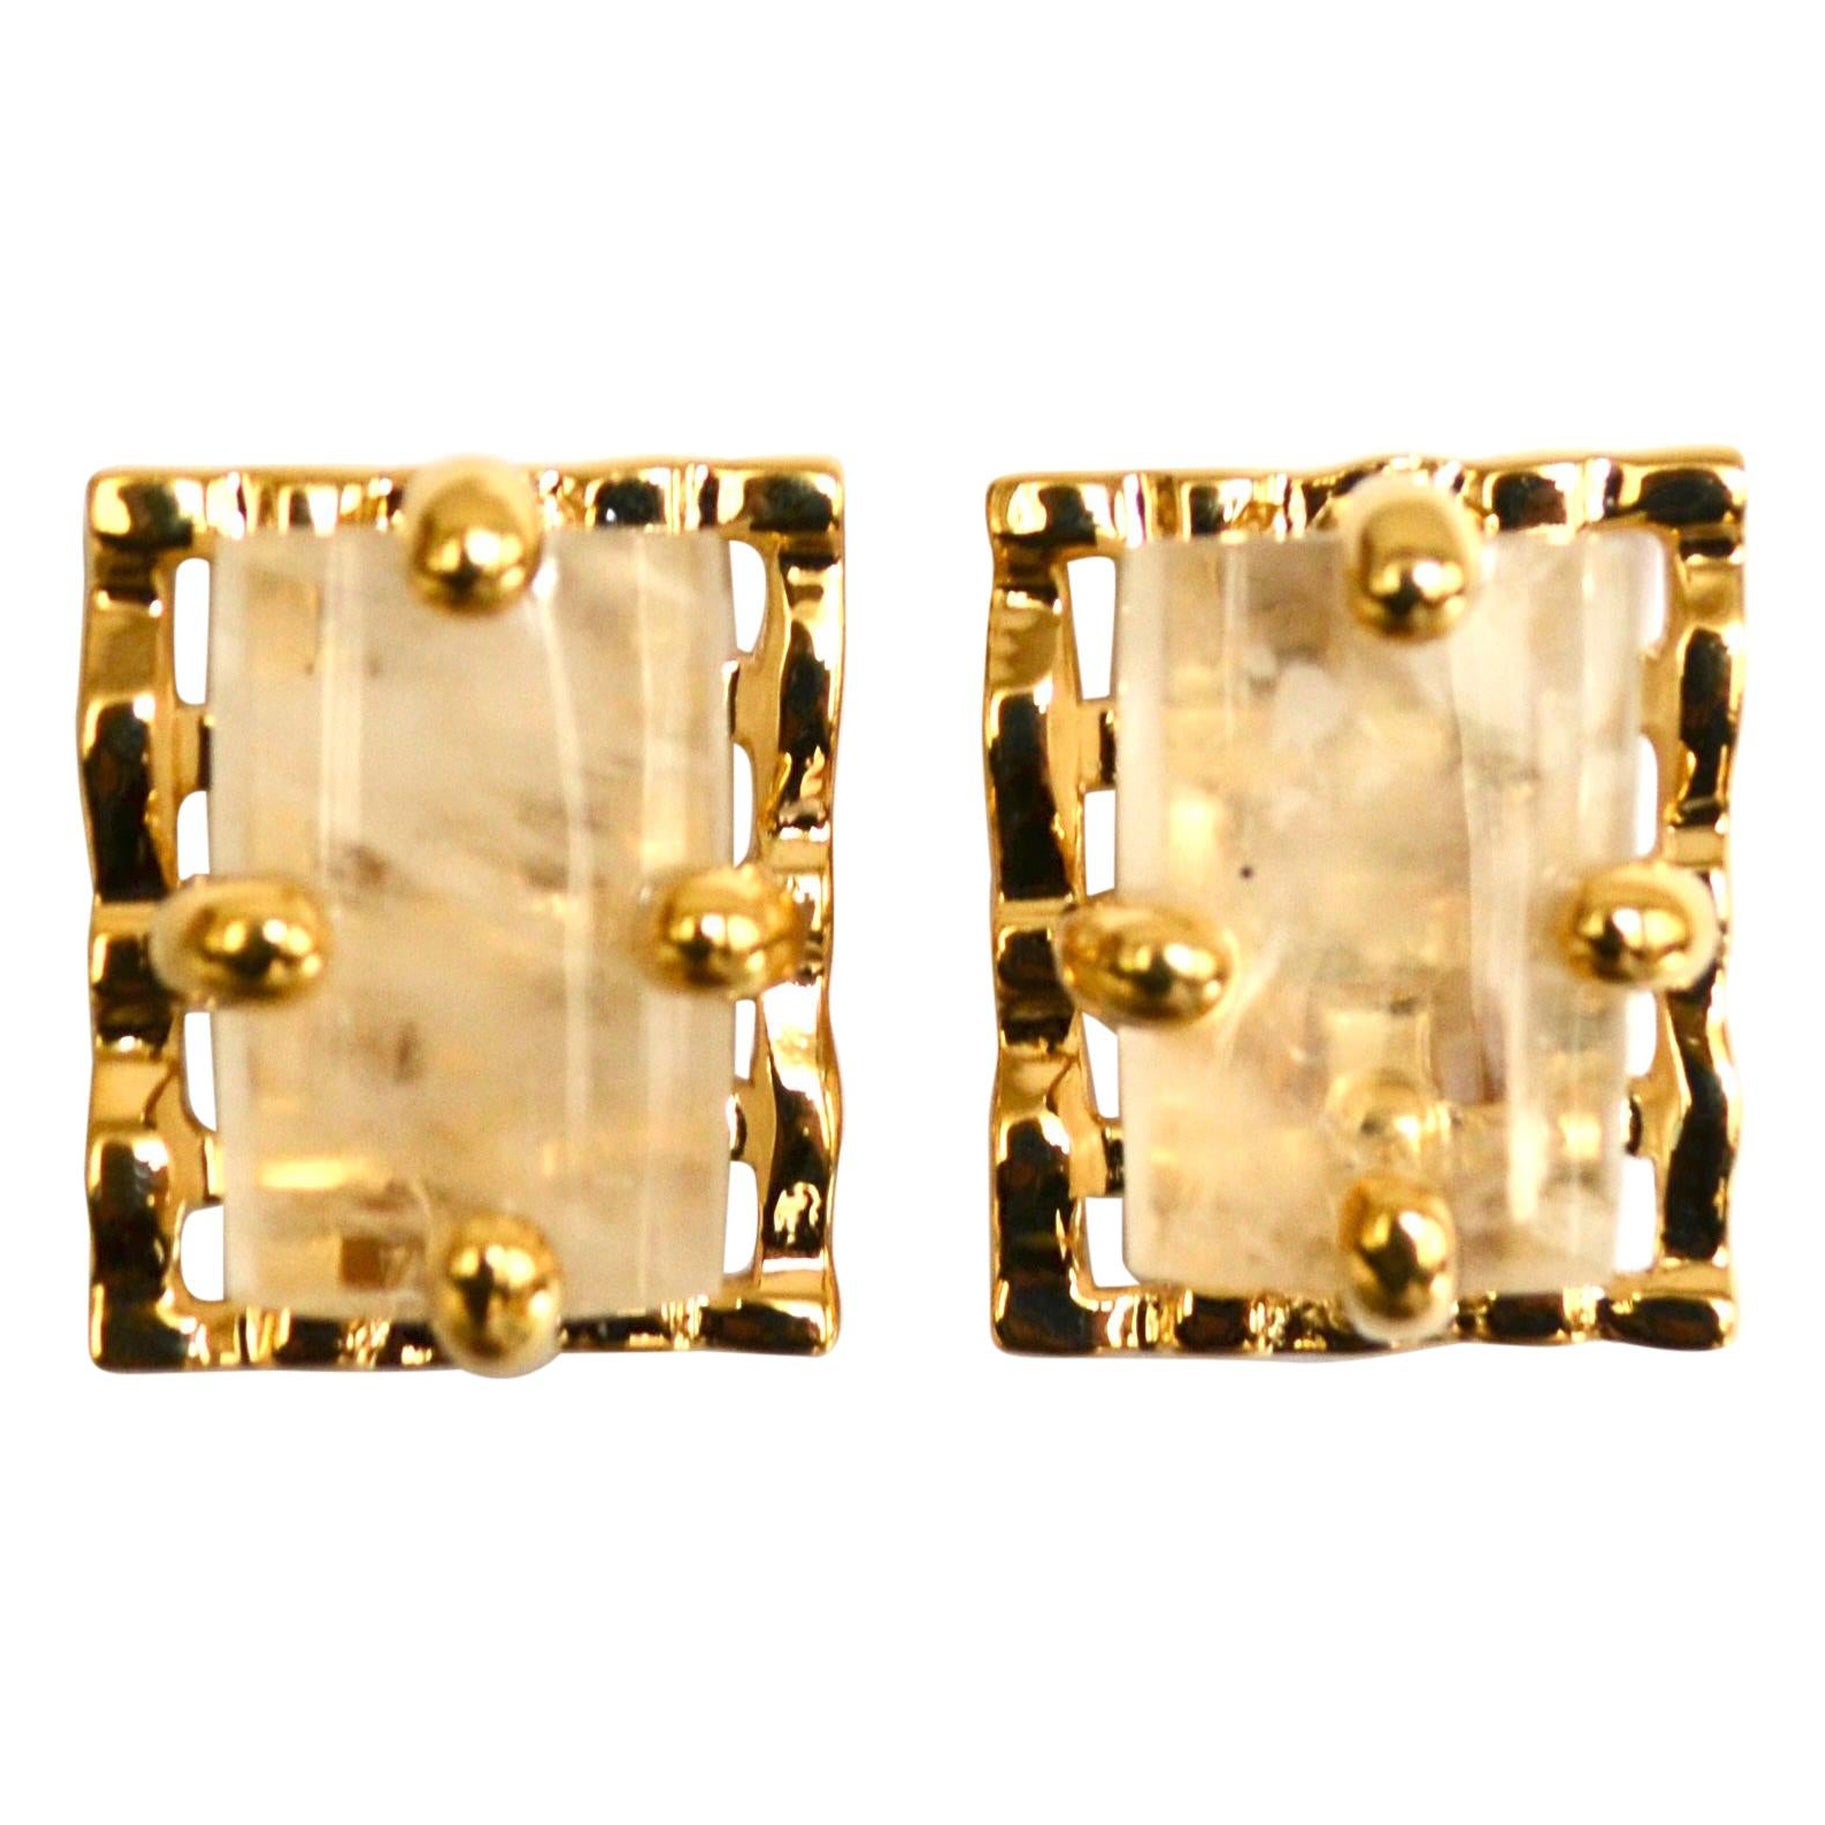 Rectangular rock stones set on 24-carat gilded bronze clip earrings.
This designer was Robert Goossens personal assistant in all of his creations. She worked by his side for 20 years creating collections for Yves St Laurent and many more couture